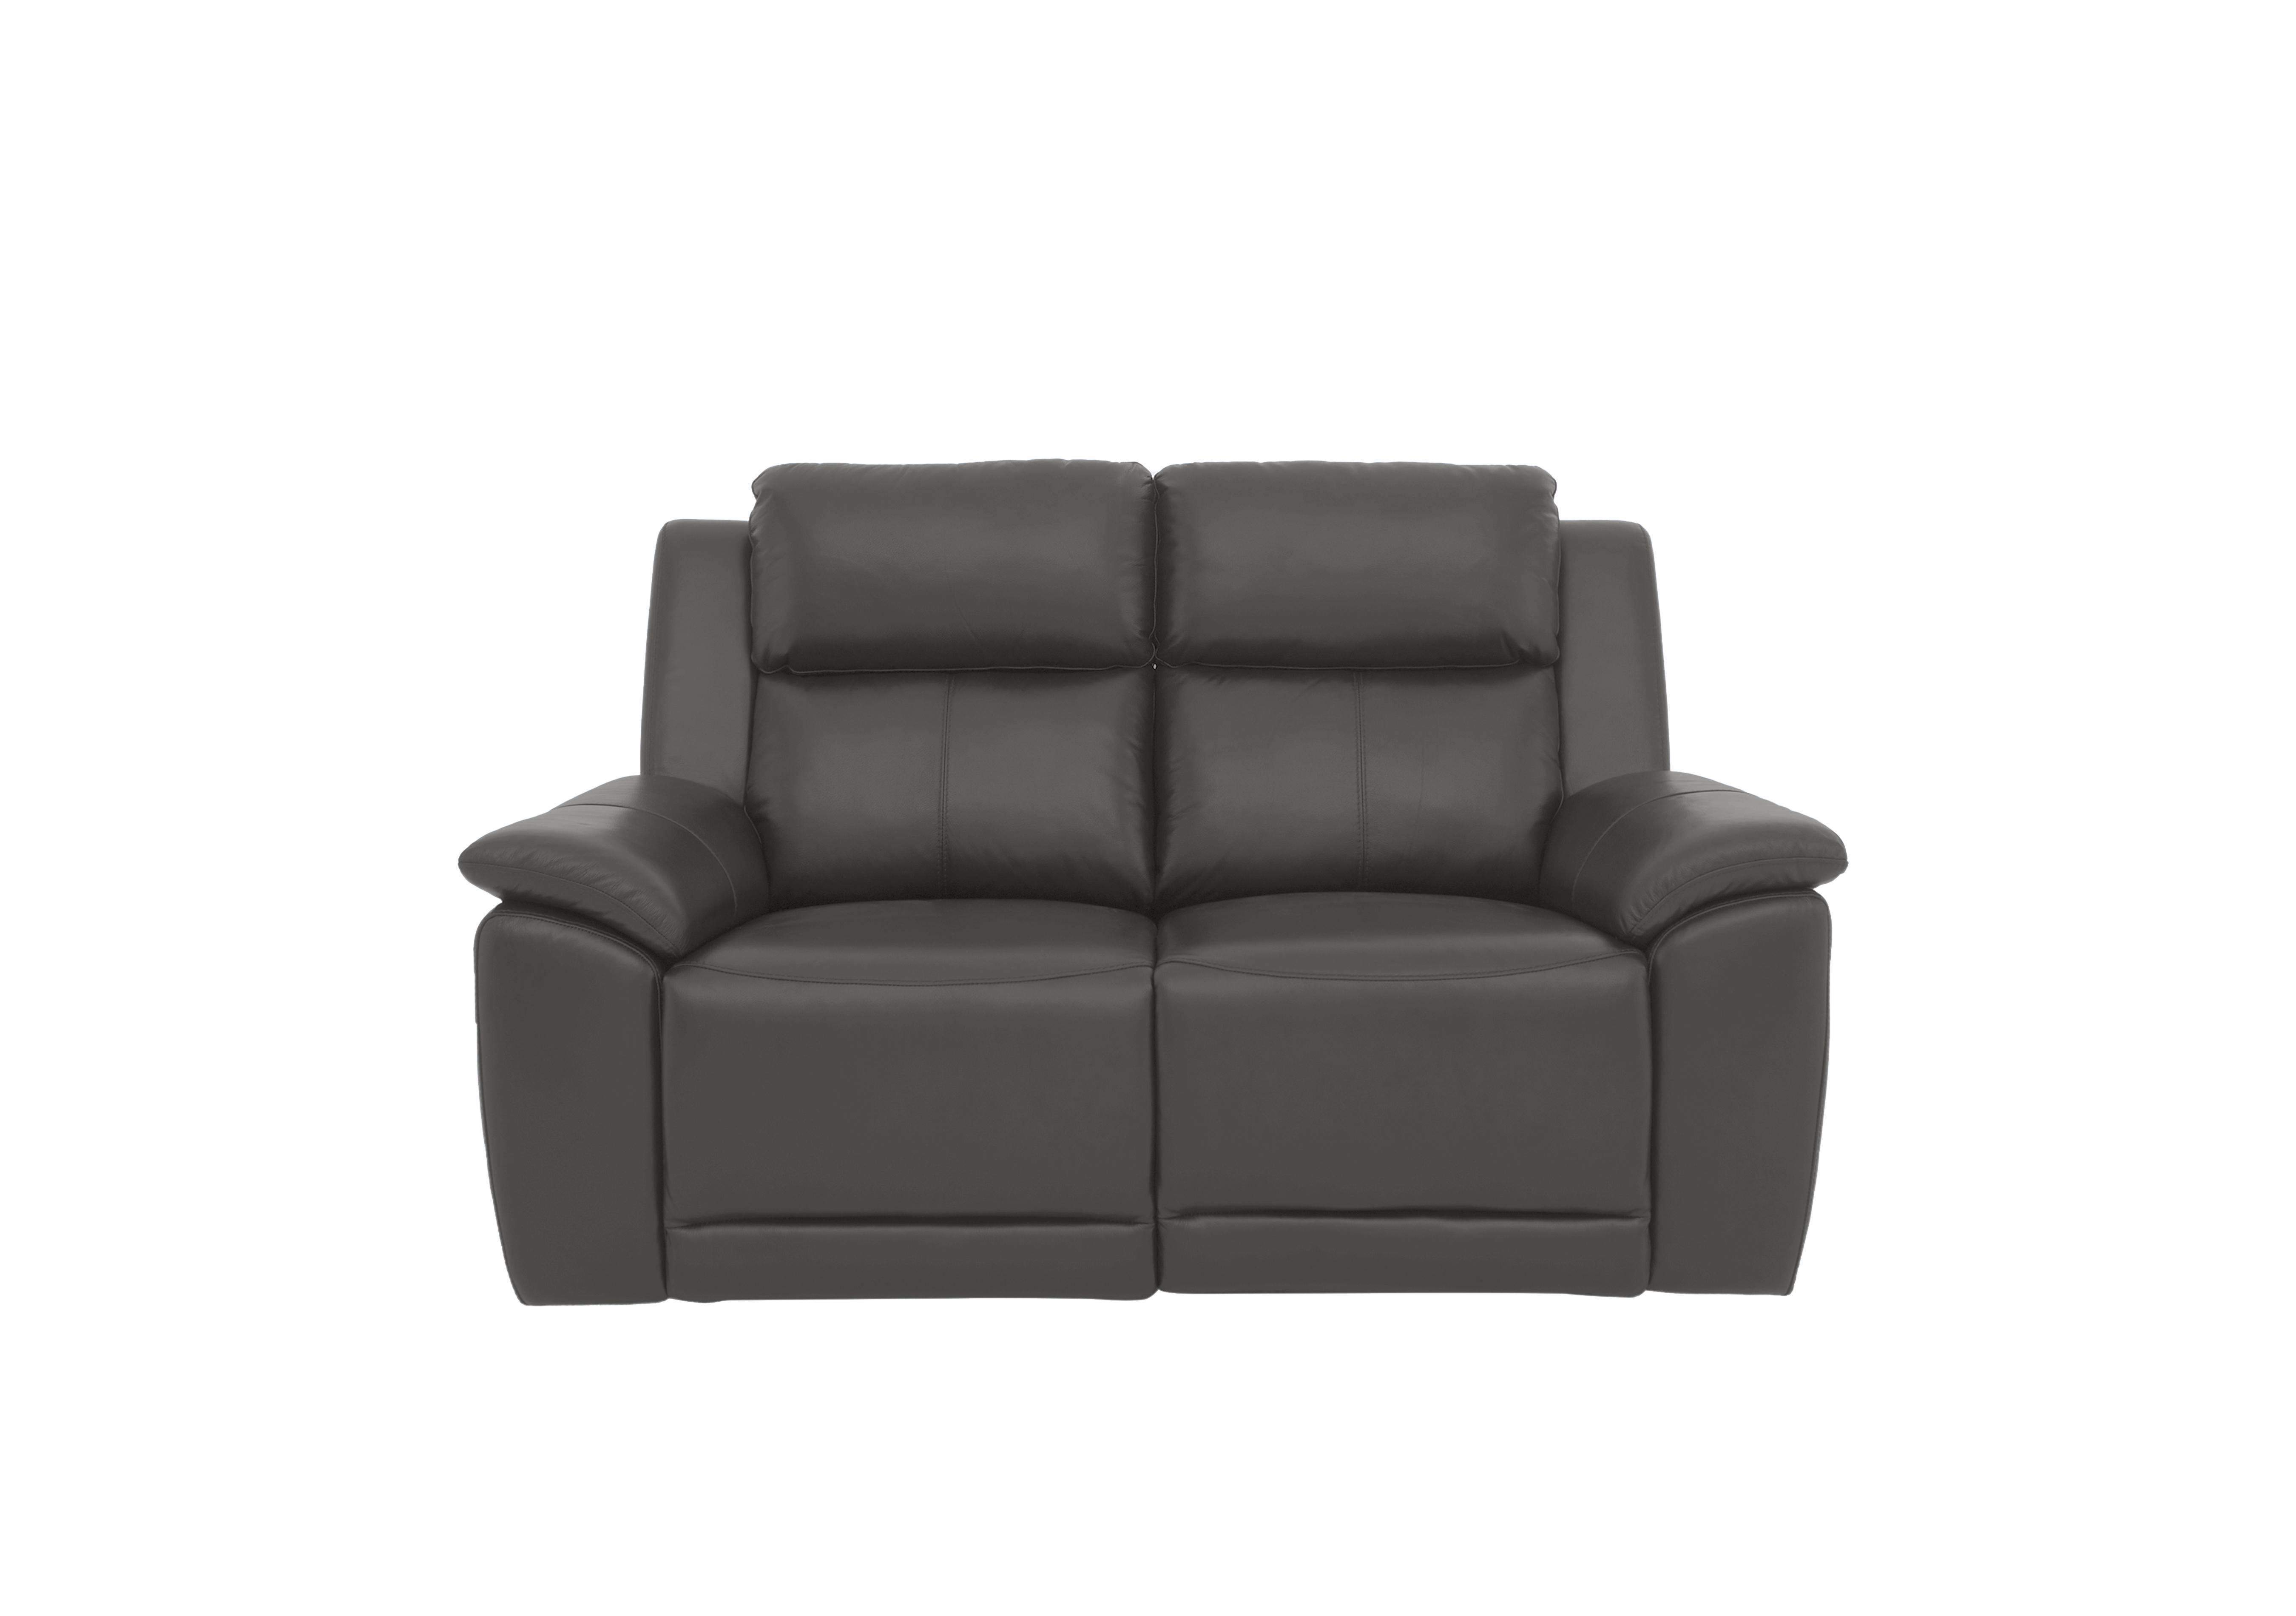 Utah 2 Seater Leather Power Recliner Sofa with Power Headrests and Power Lumbar in Grey Le-9308 on Furniture Village